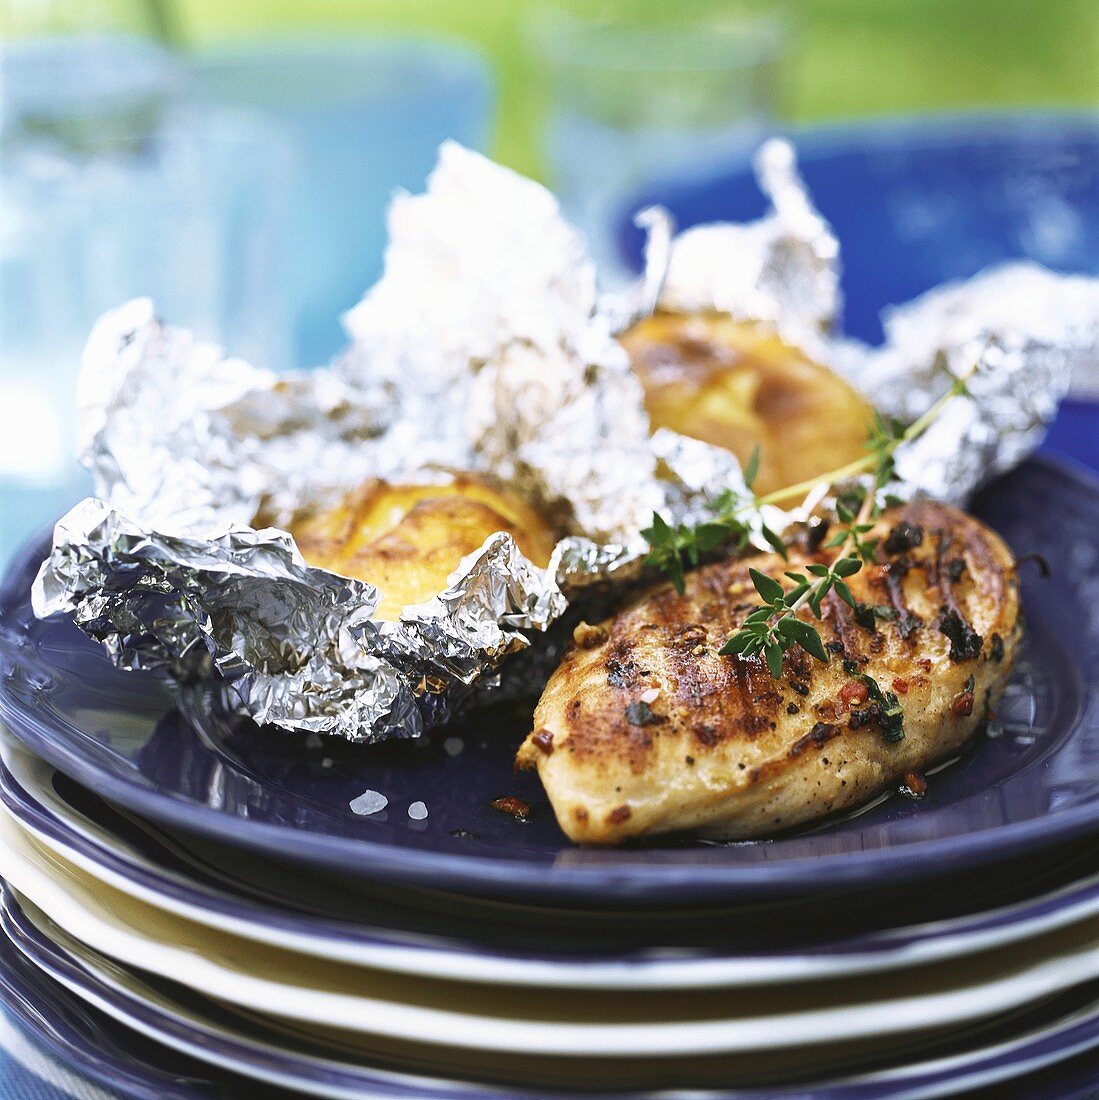 Grilled chicken with baked potatoes